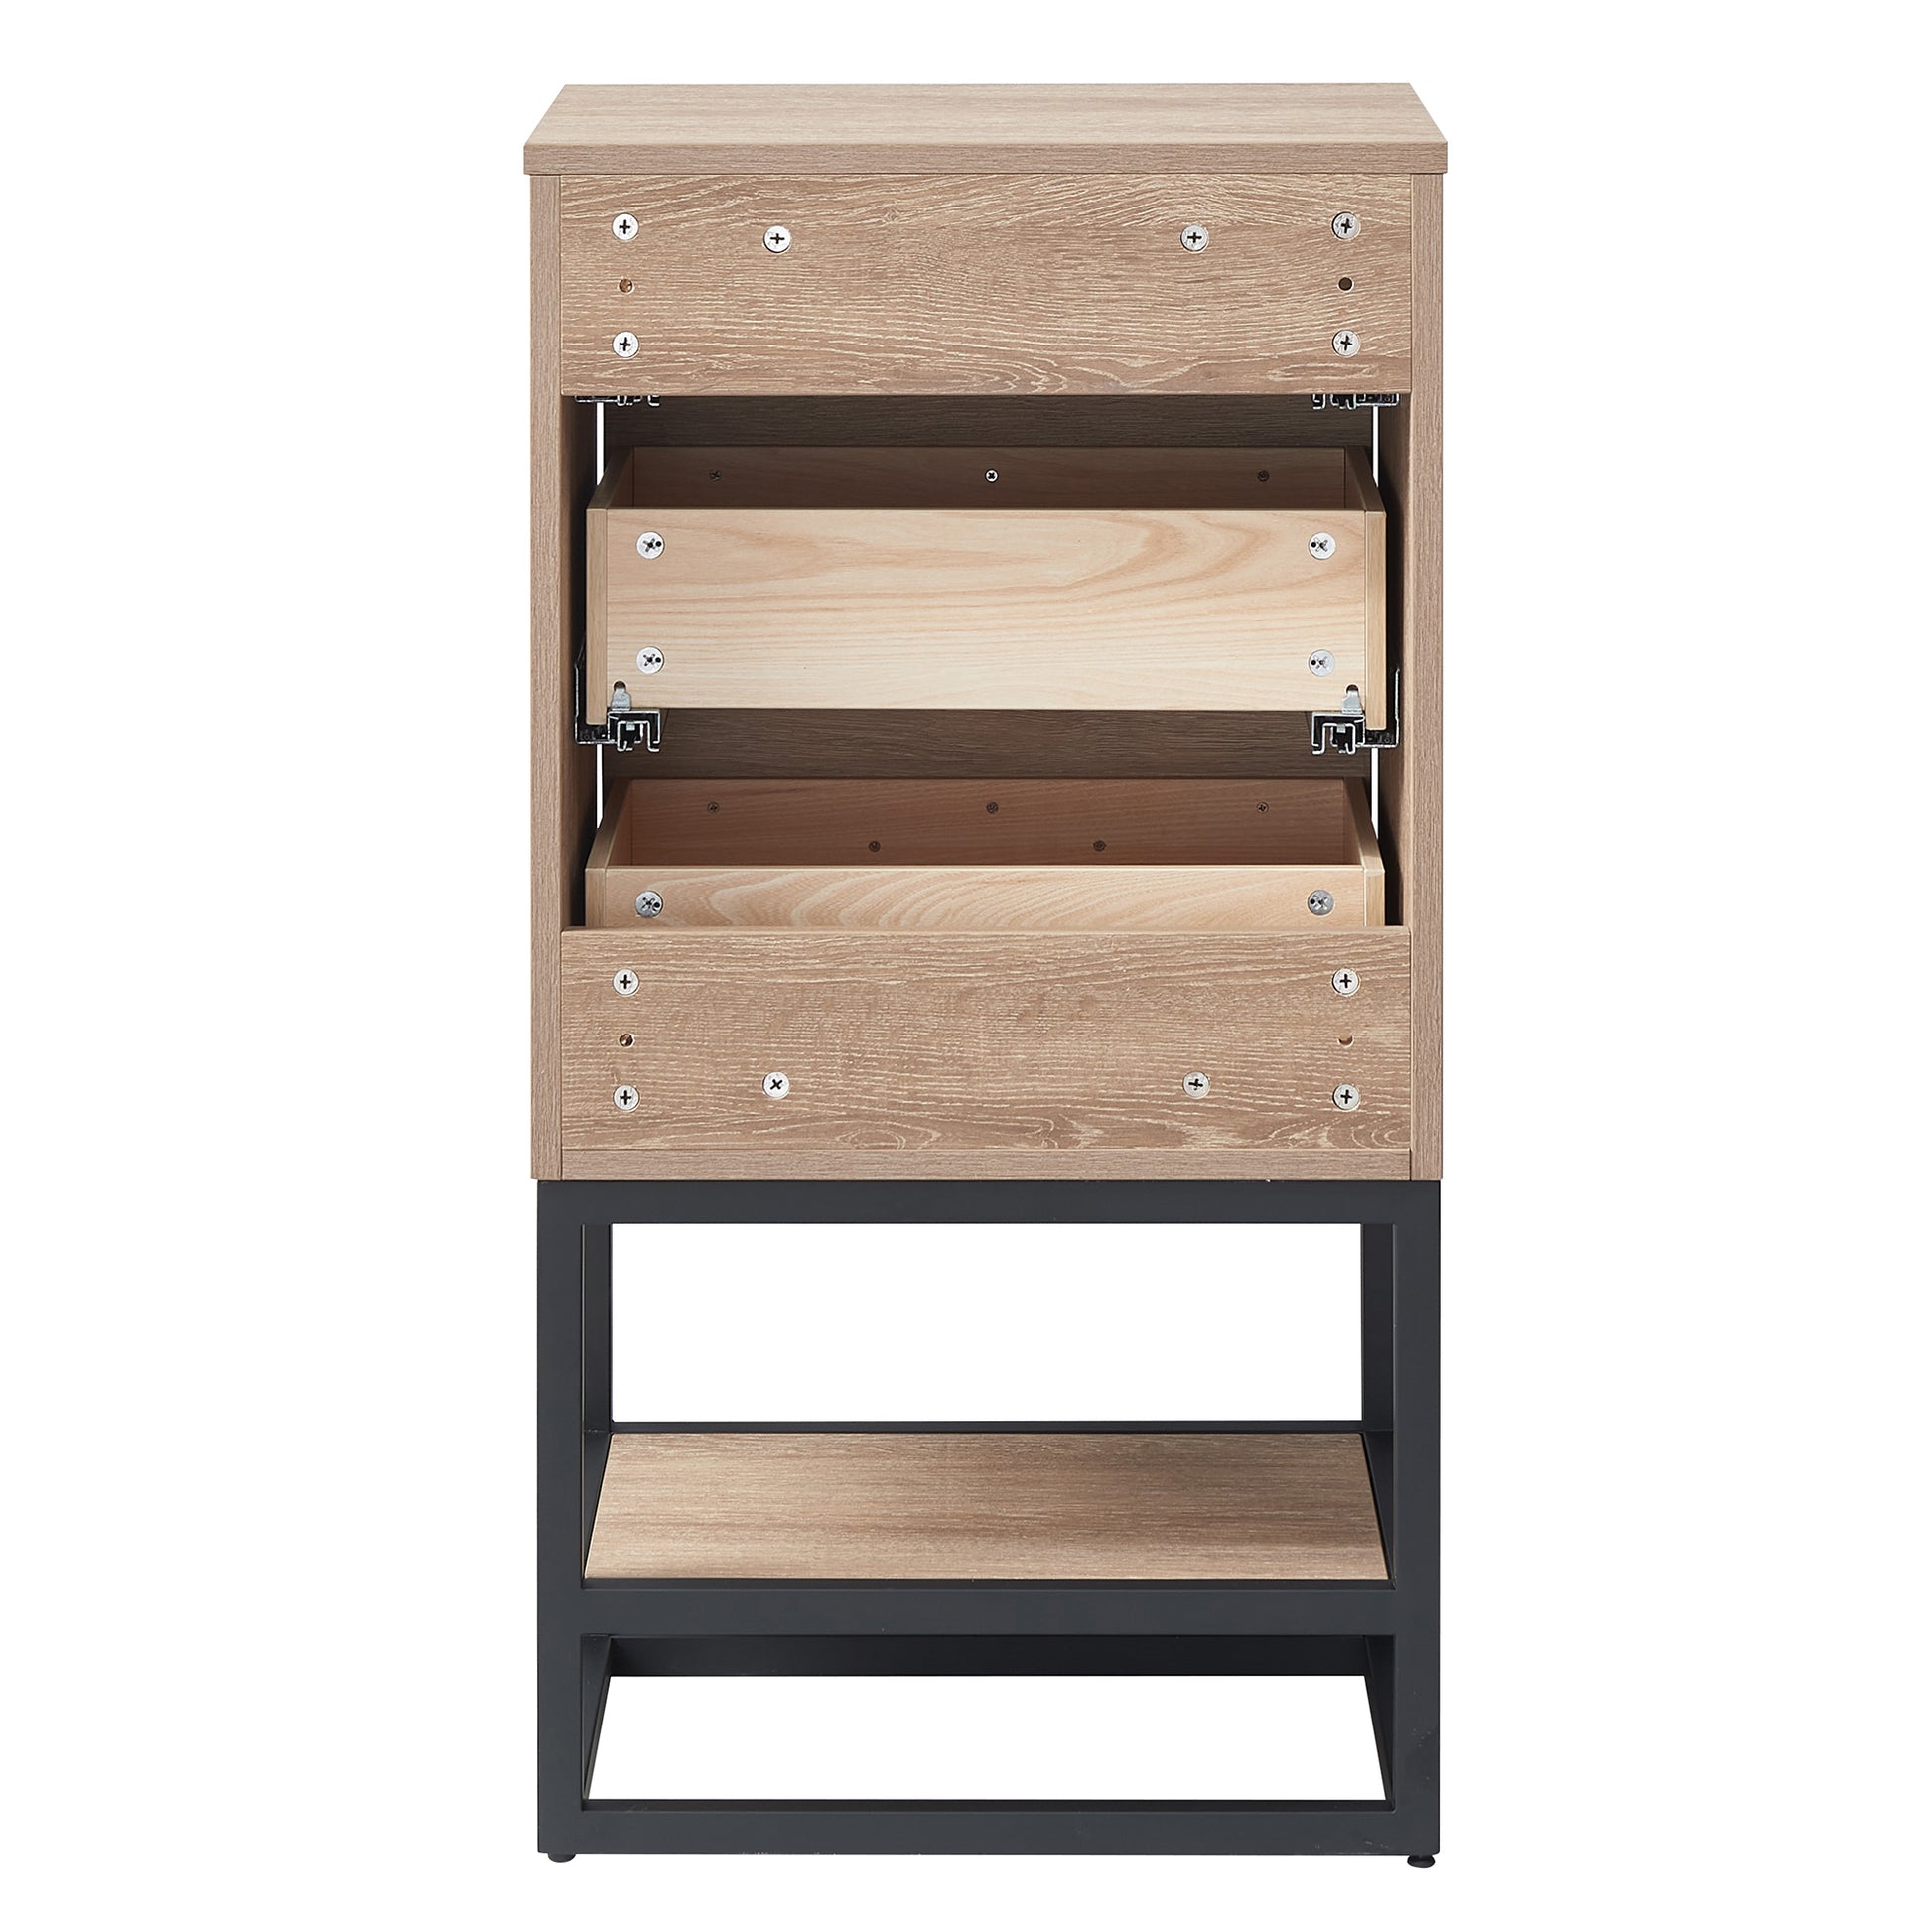 
  
  Alistair 19.7" Storage Cabinet in North American Oak Finish with 3 Drawers 1 Shelf for Bathroom and Living Room
  
